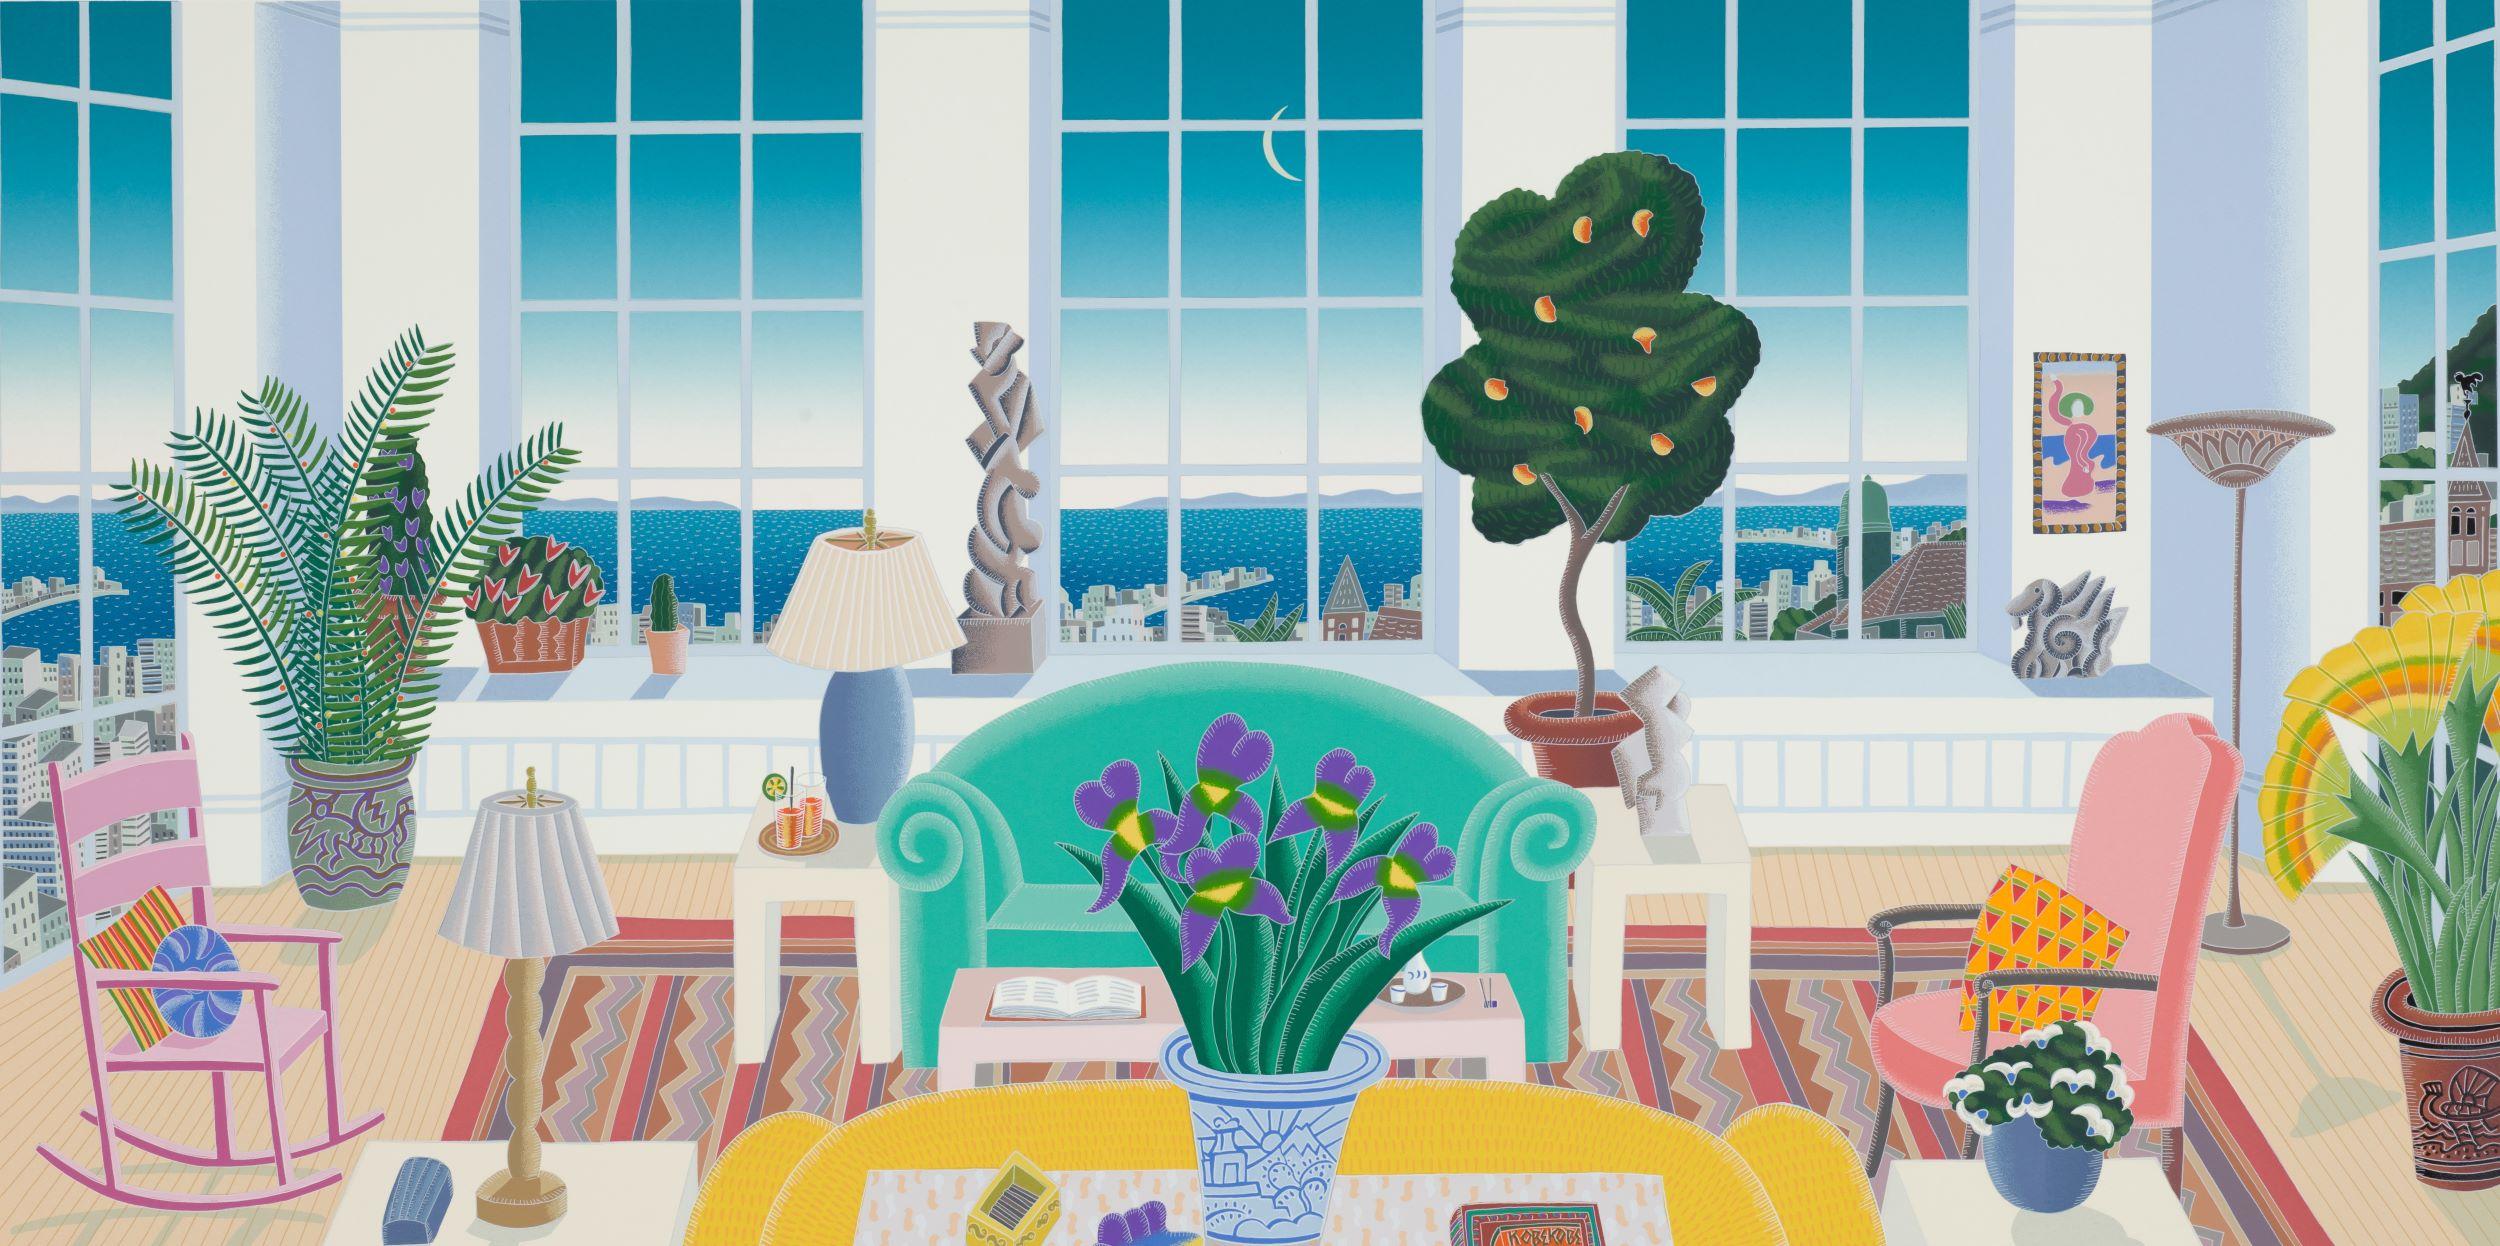 Pacific Heights - Print by Thomas McKnight